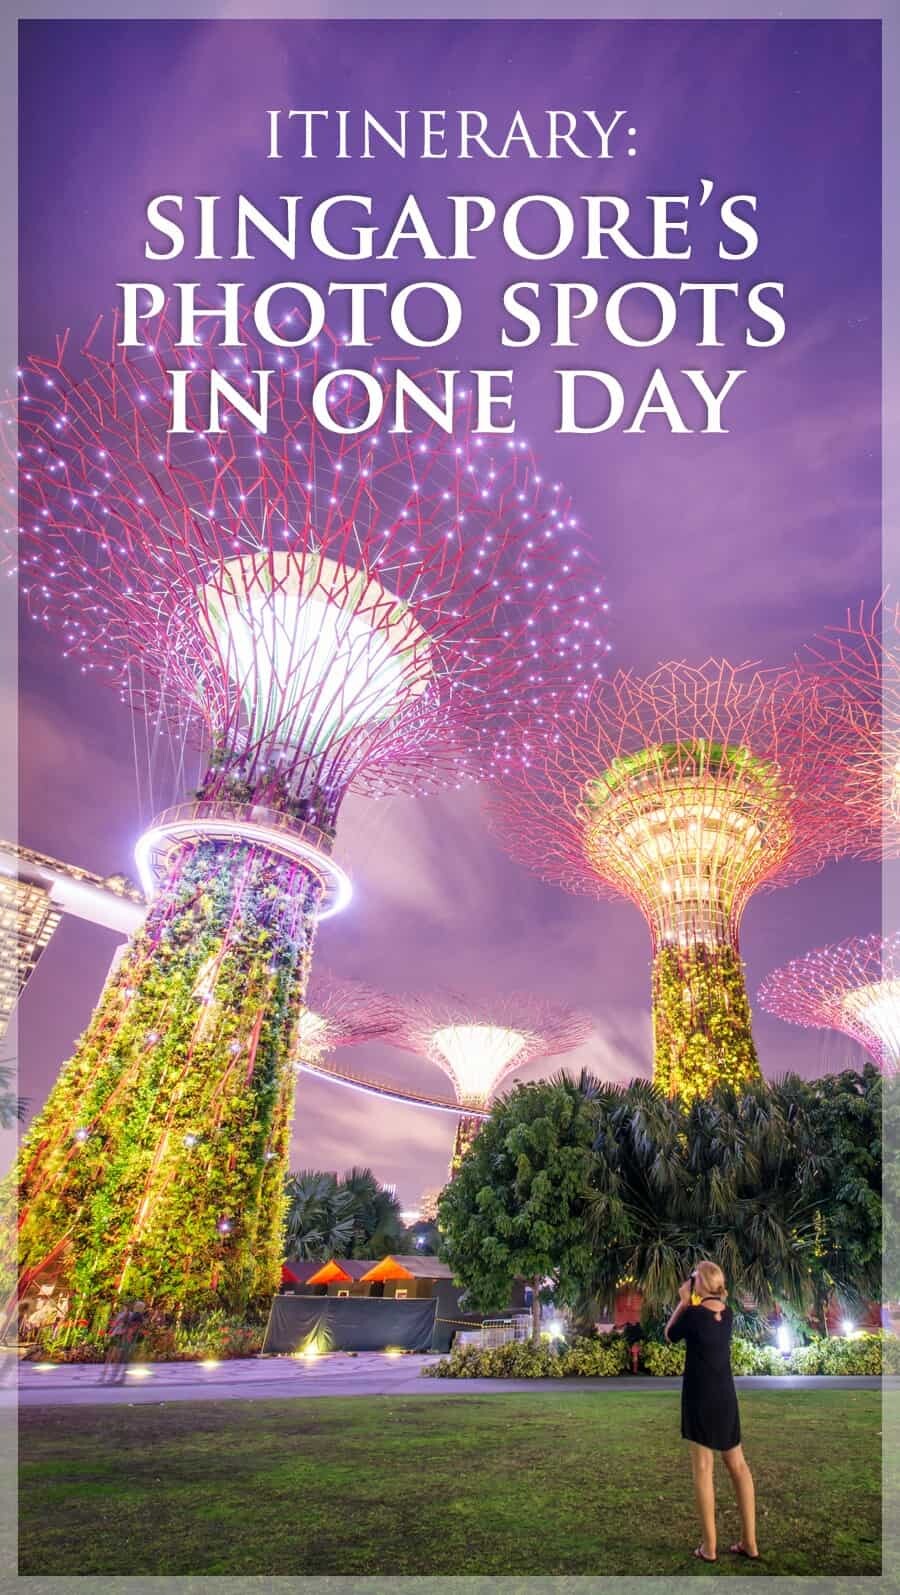 Singapore Travel Guide and Itinerary of Photography Locations by The Wandering Lens